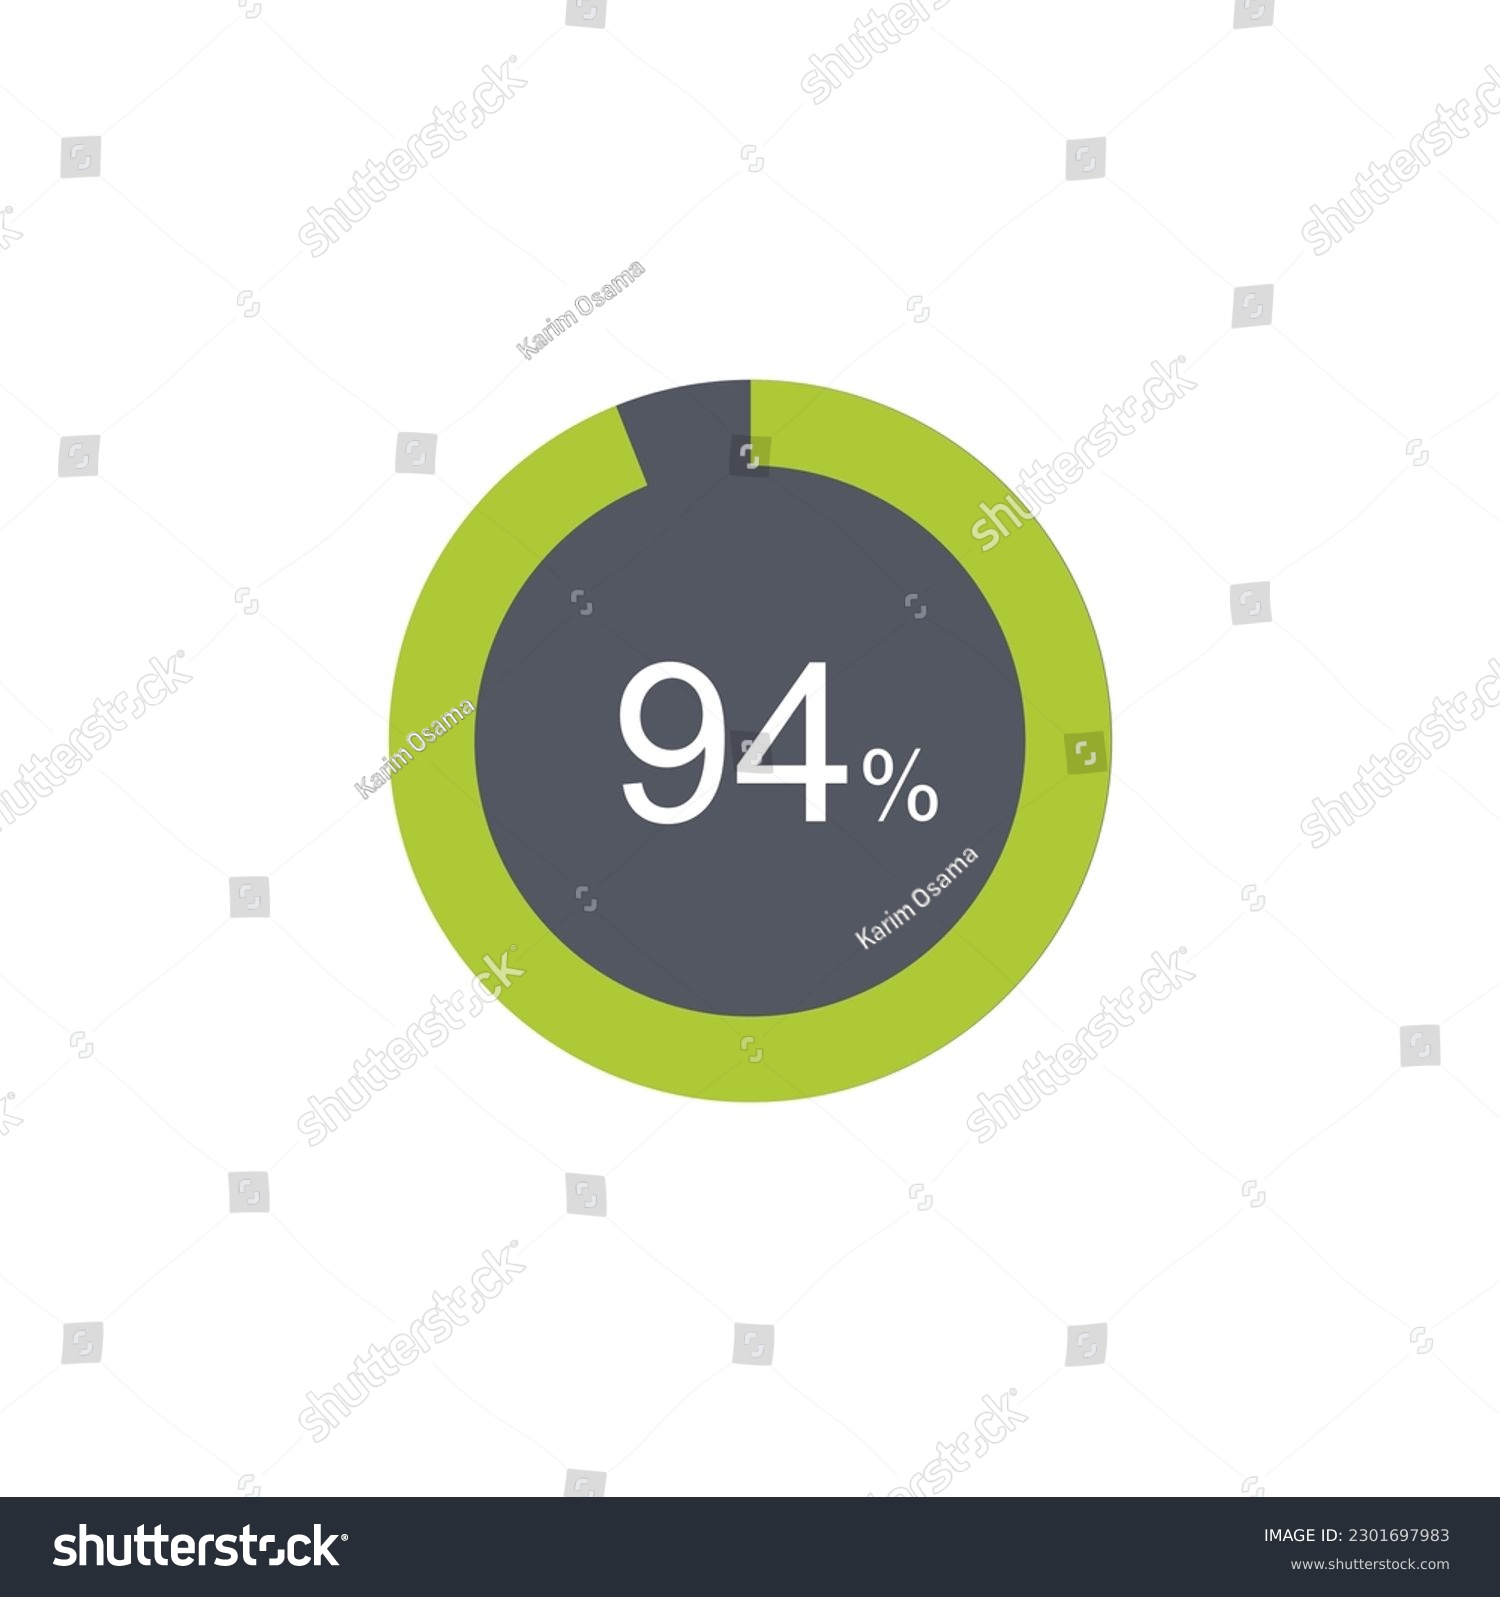 SVG of 94% circle percentage diagram ready-to-use for web design, user interface UI or infographic. svg